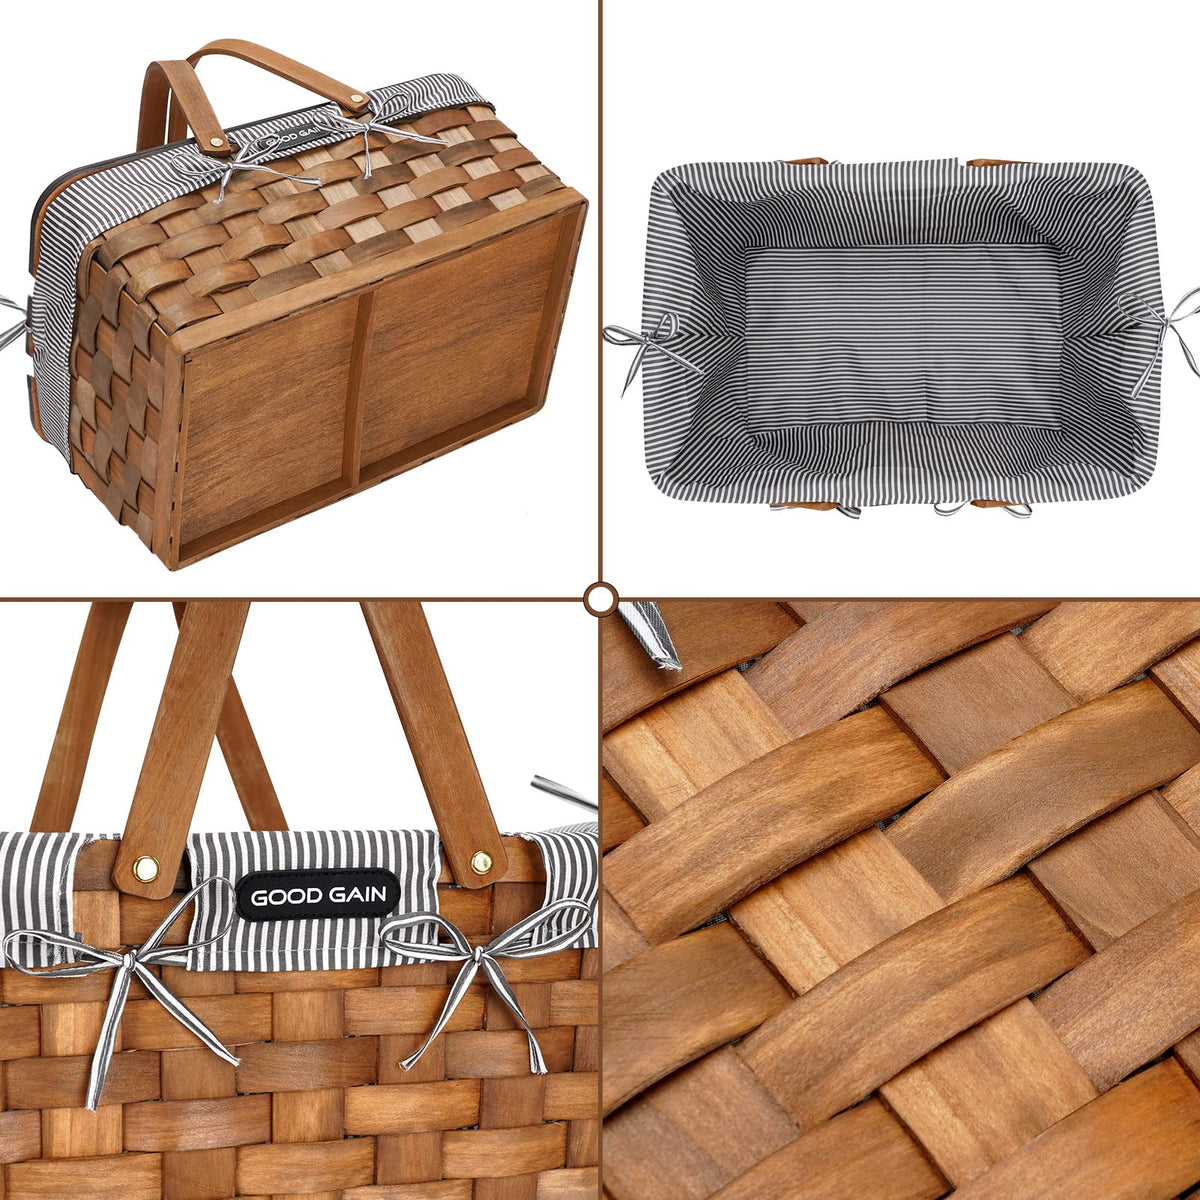 Romantic Woodchip Picnic Basket For 4 Persons-Gray